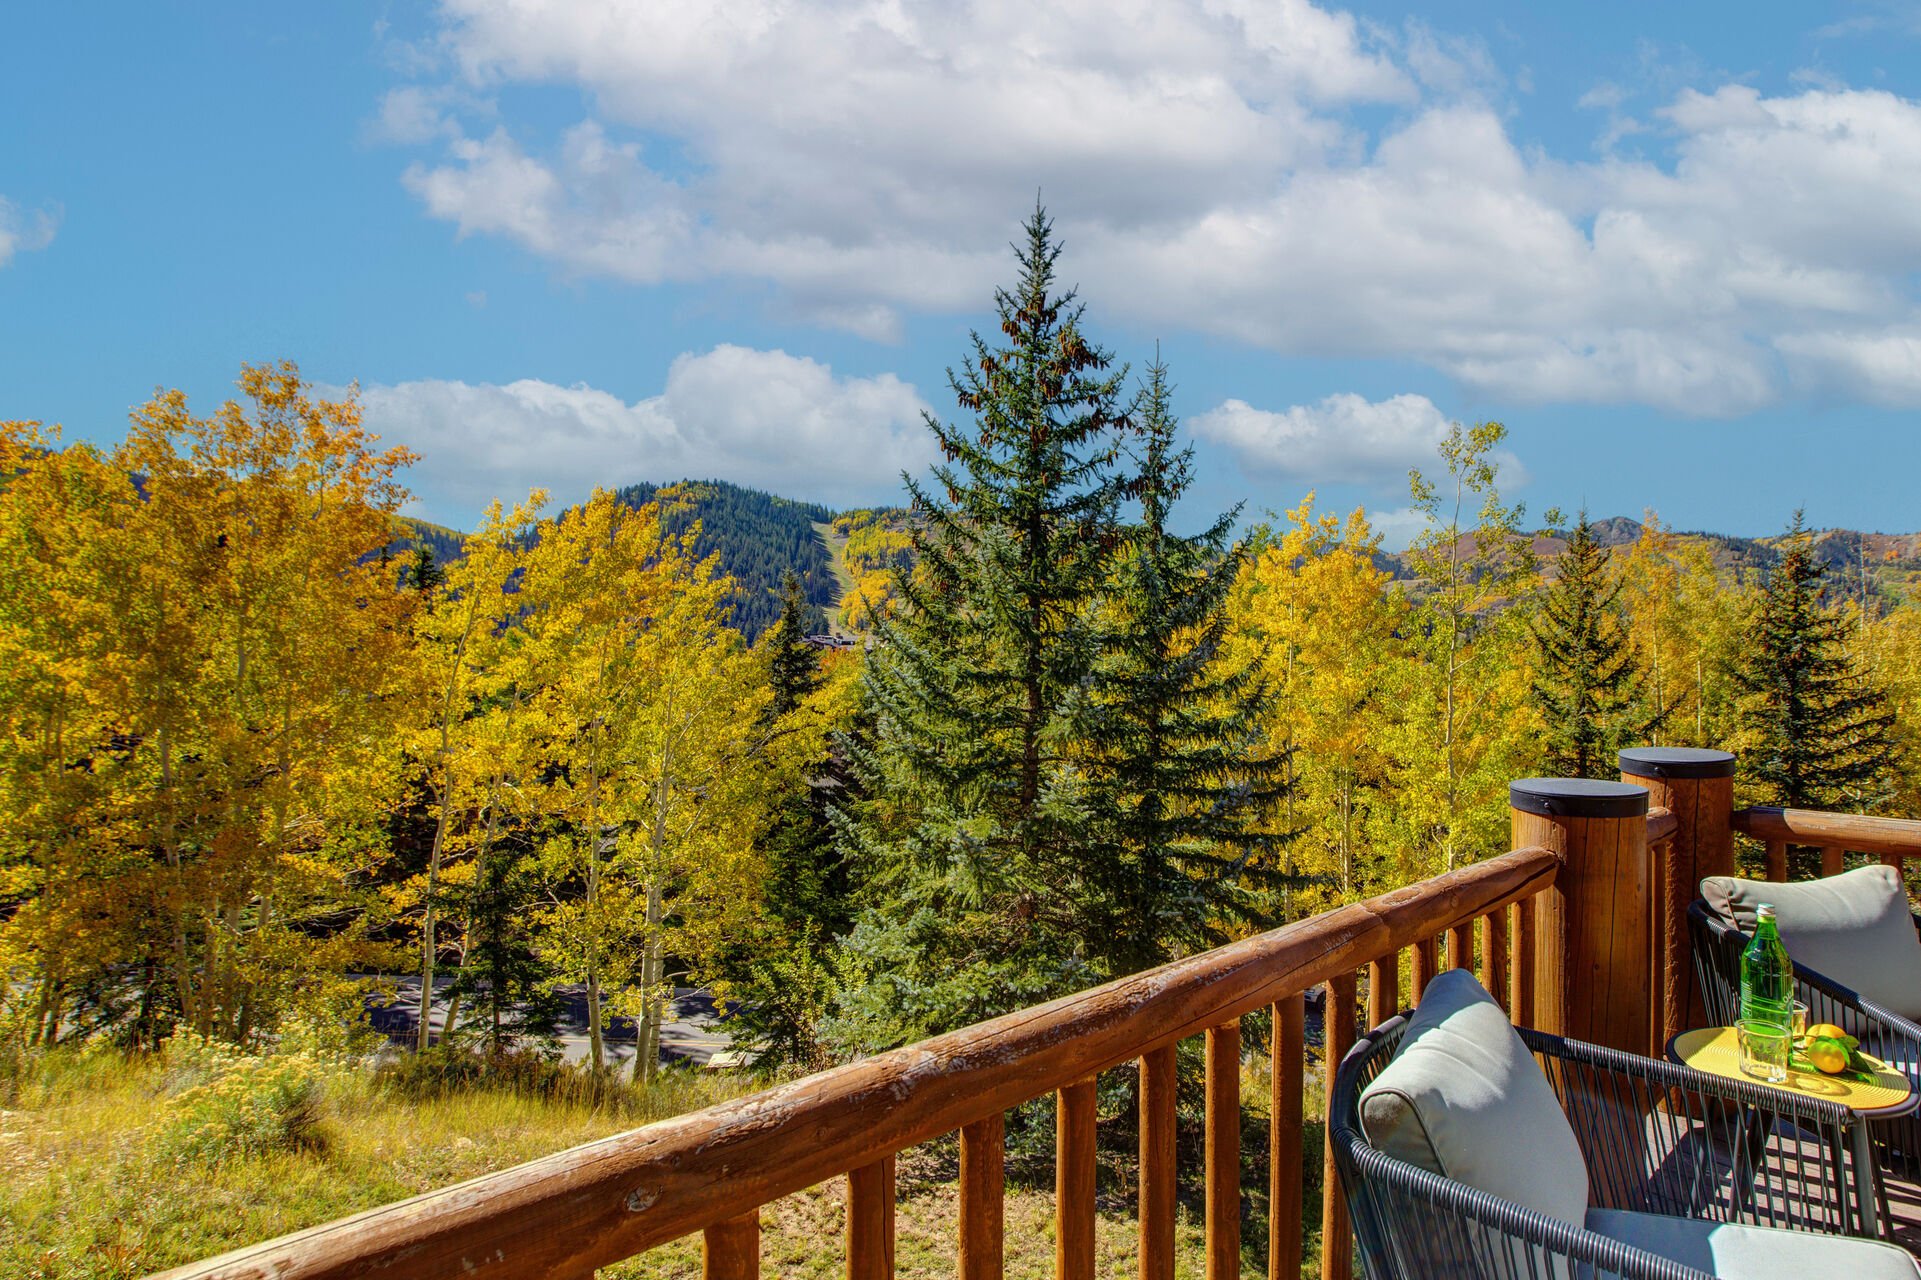 Private deck overlooking the beautiful surrounding mountains with BBQ grill and contemporary outdoor furnishings